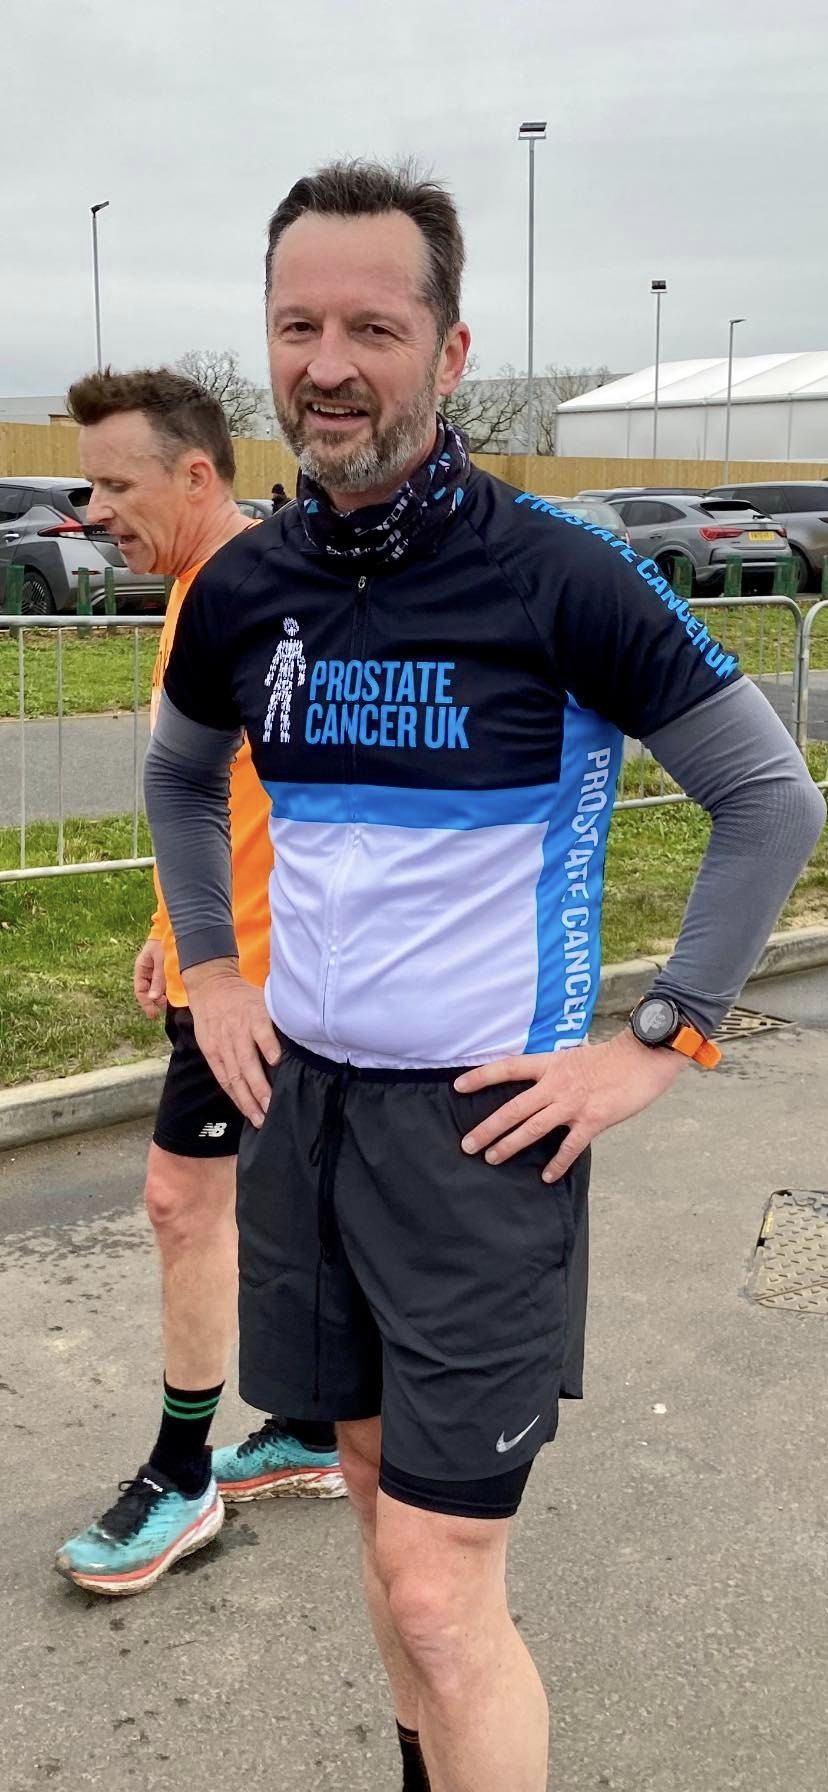 Man dressed in a Prostate Cancer UK sports shirt